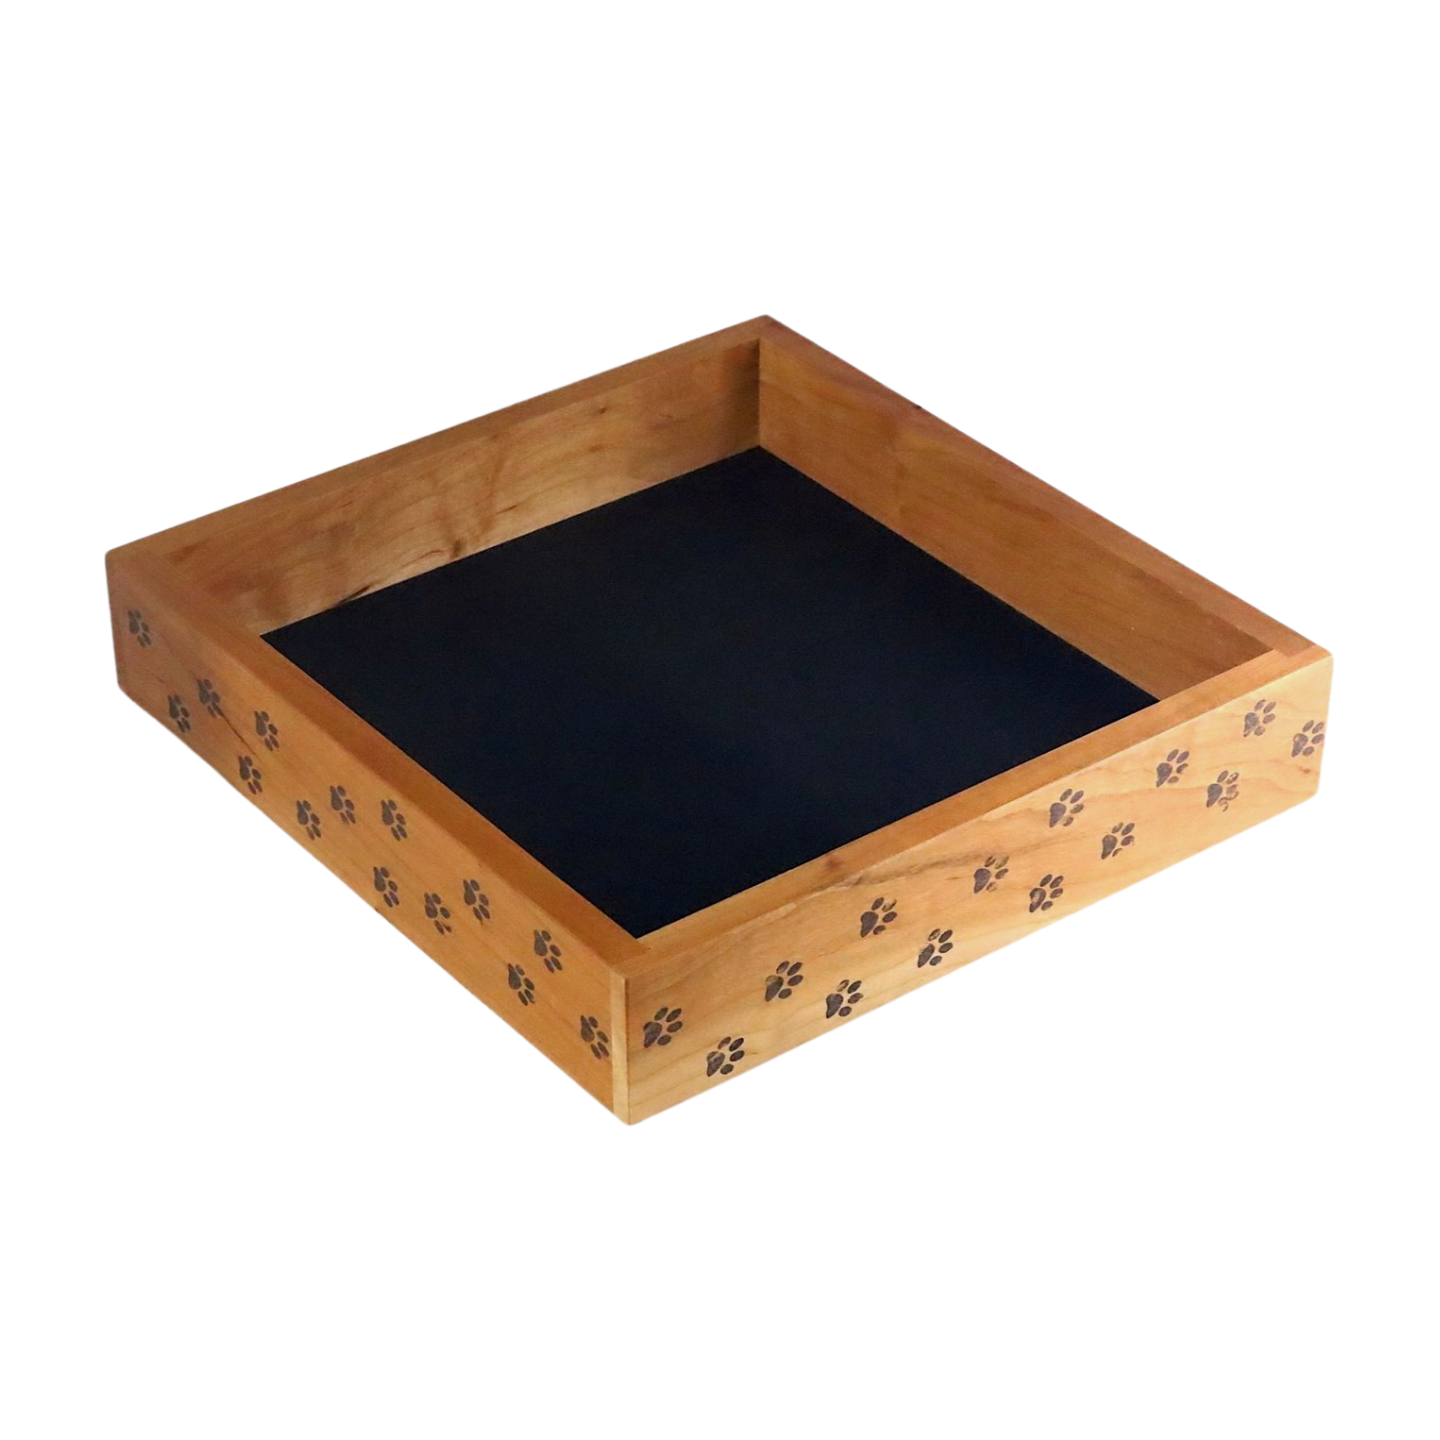 large cute cat paw wood dice tray for TTRPG, Bunco, Yahtzee Dice Games, DnD dice rolling tray with kitty paw prints goth gift for gamer girl - Dragon Armor Games